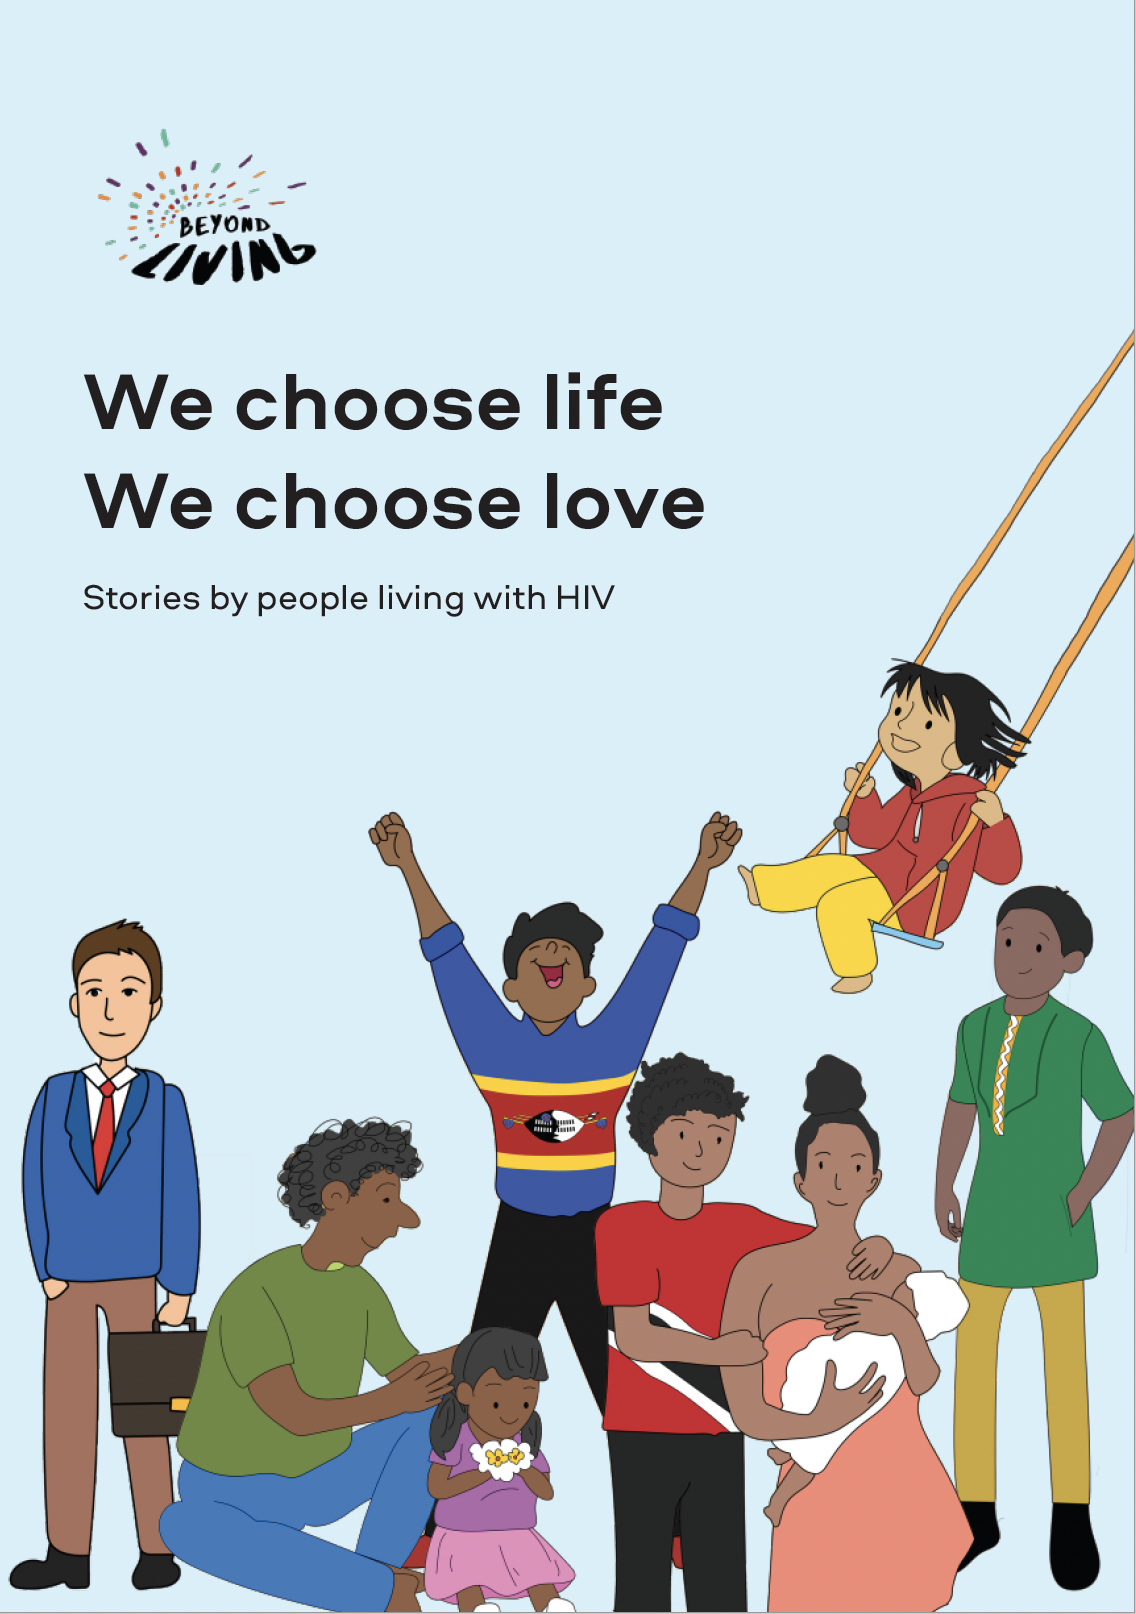 We choose life, We choose love – Stories of people living with HIV